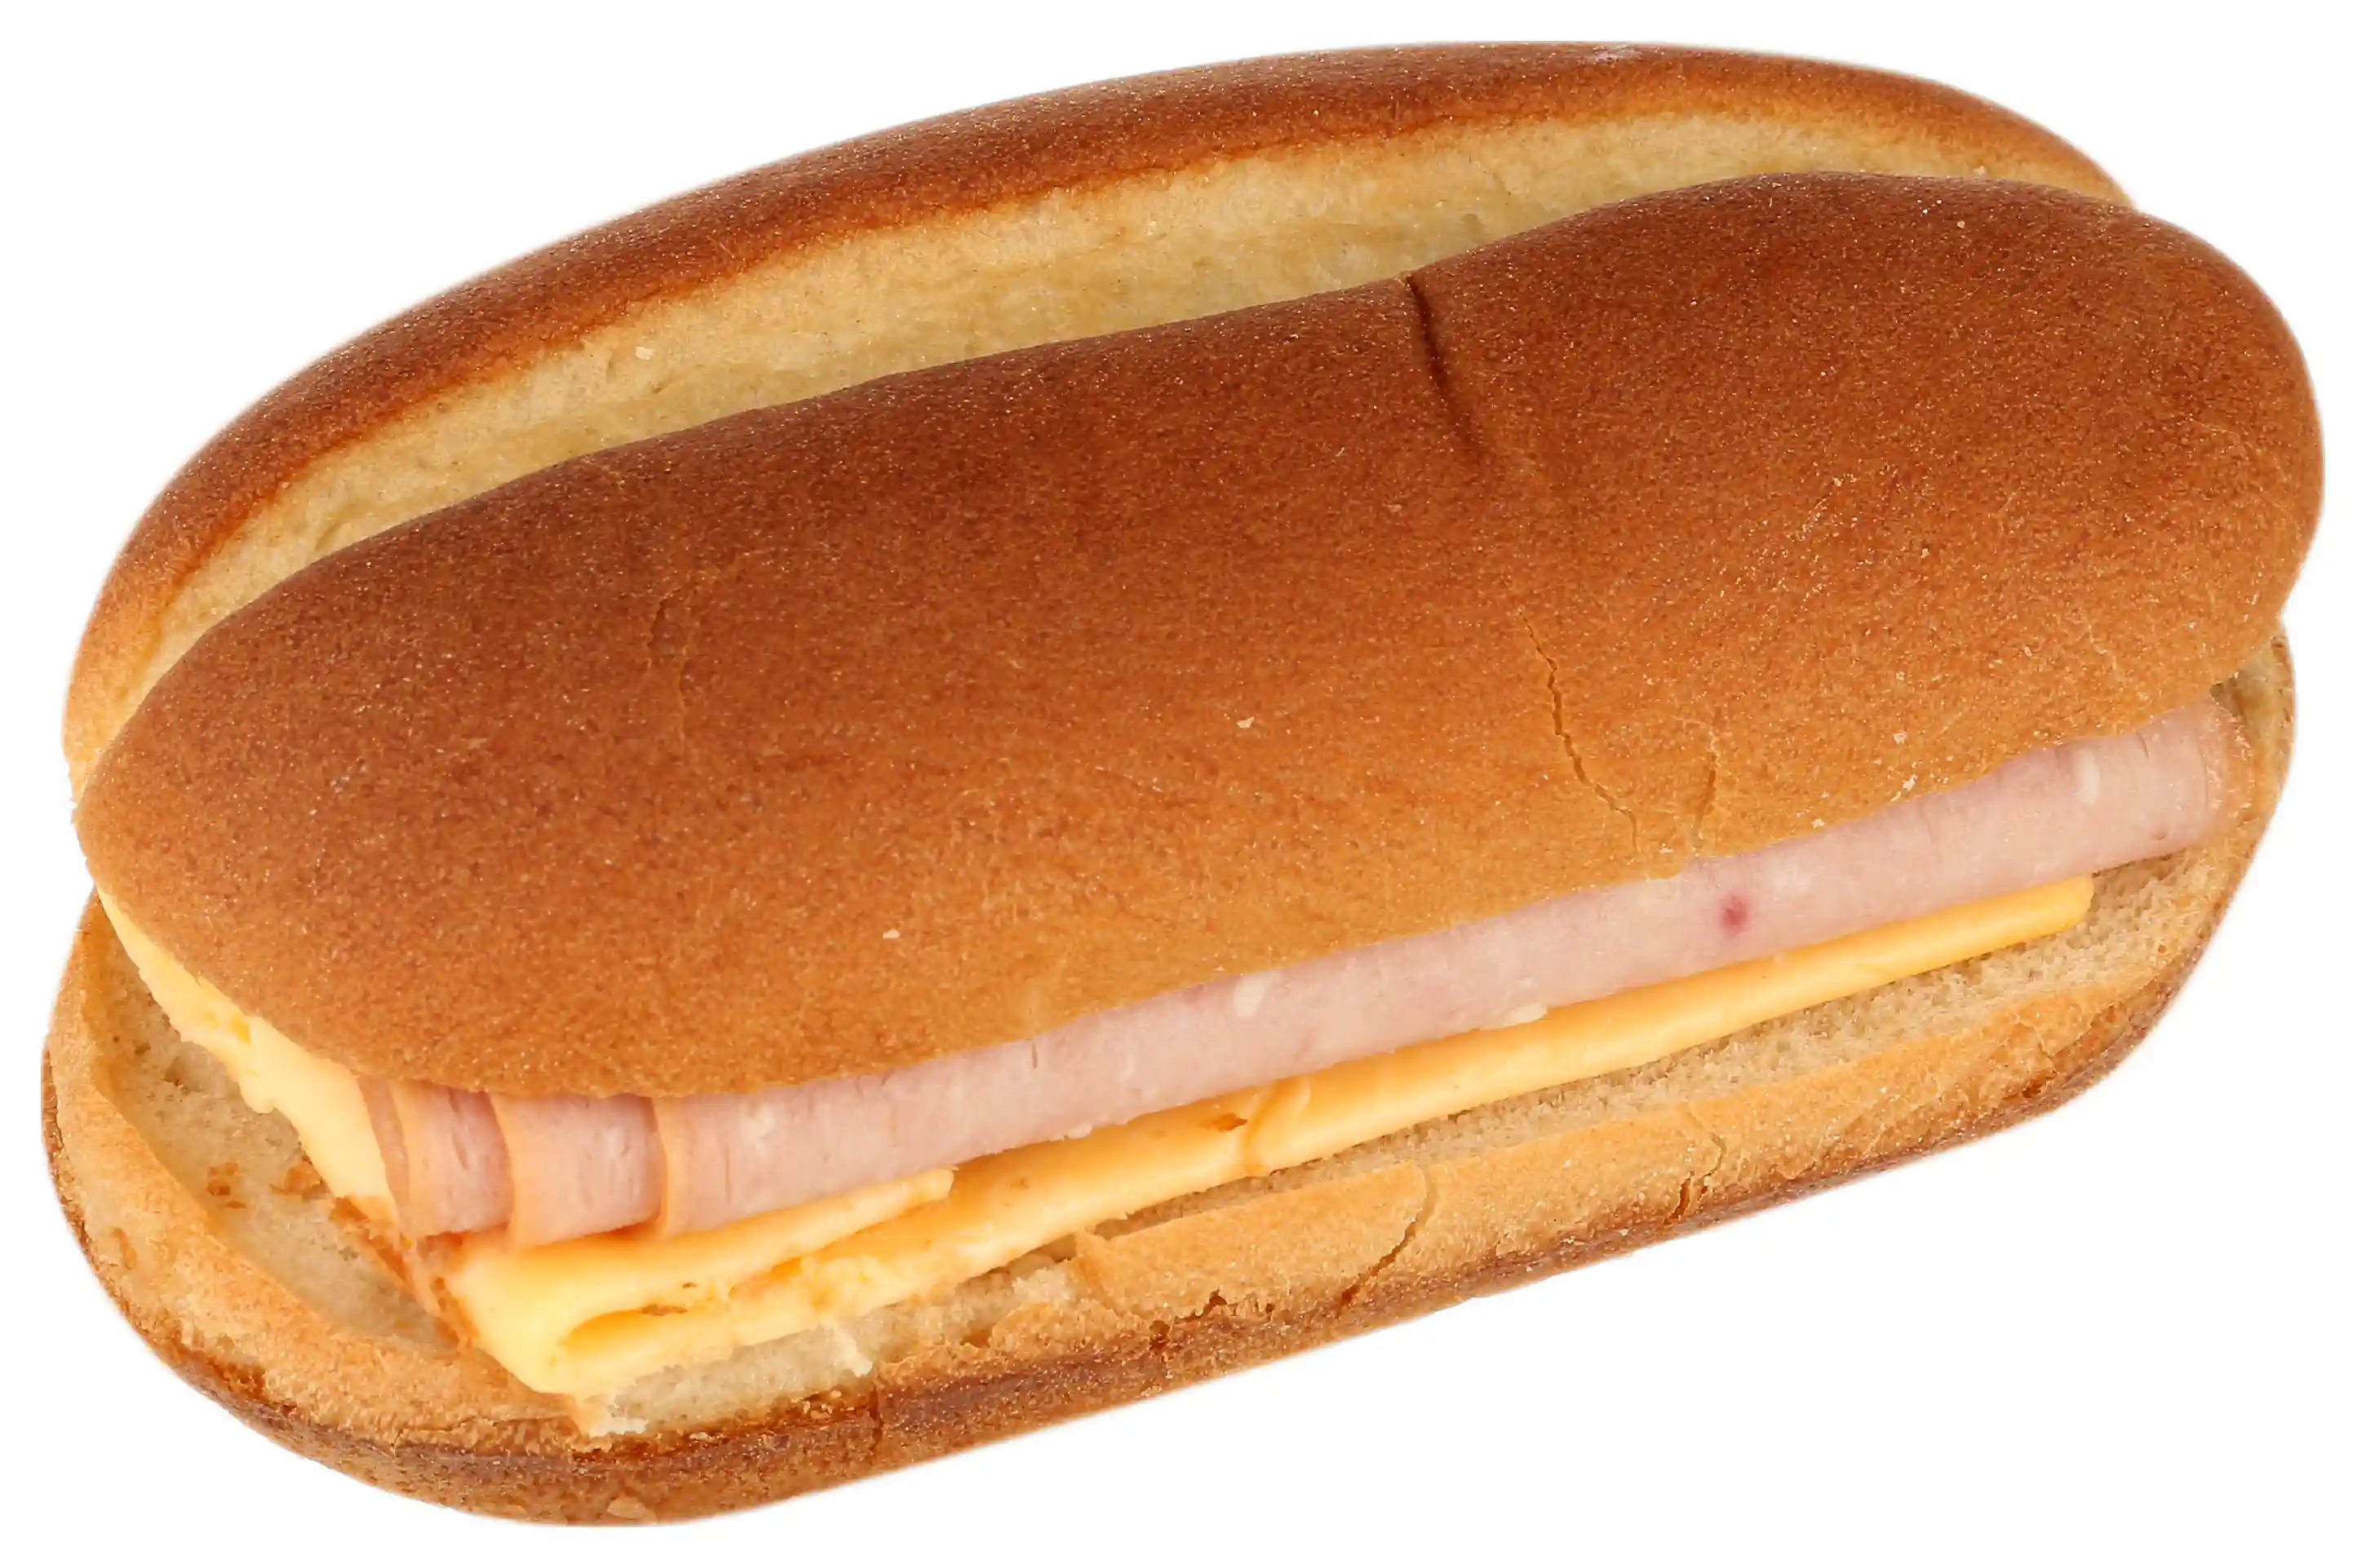 Tyson® Fully Cooked Chicken Ham & Cheese on a Whole Grain Hoagie Bun, 5.22 oz.https://images.salsify.com/image/upload/s--630MU6xh--/q_25/bklemmjn4hpeceblop7m.webp